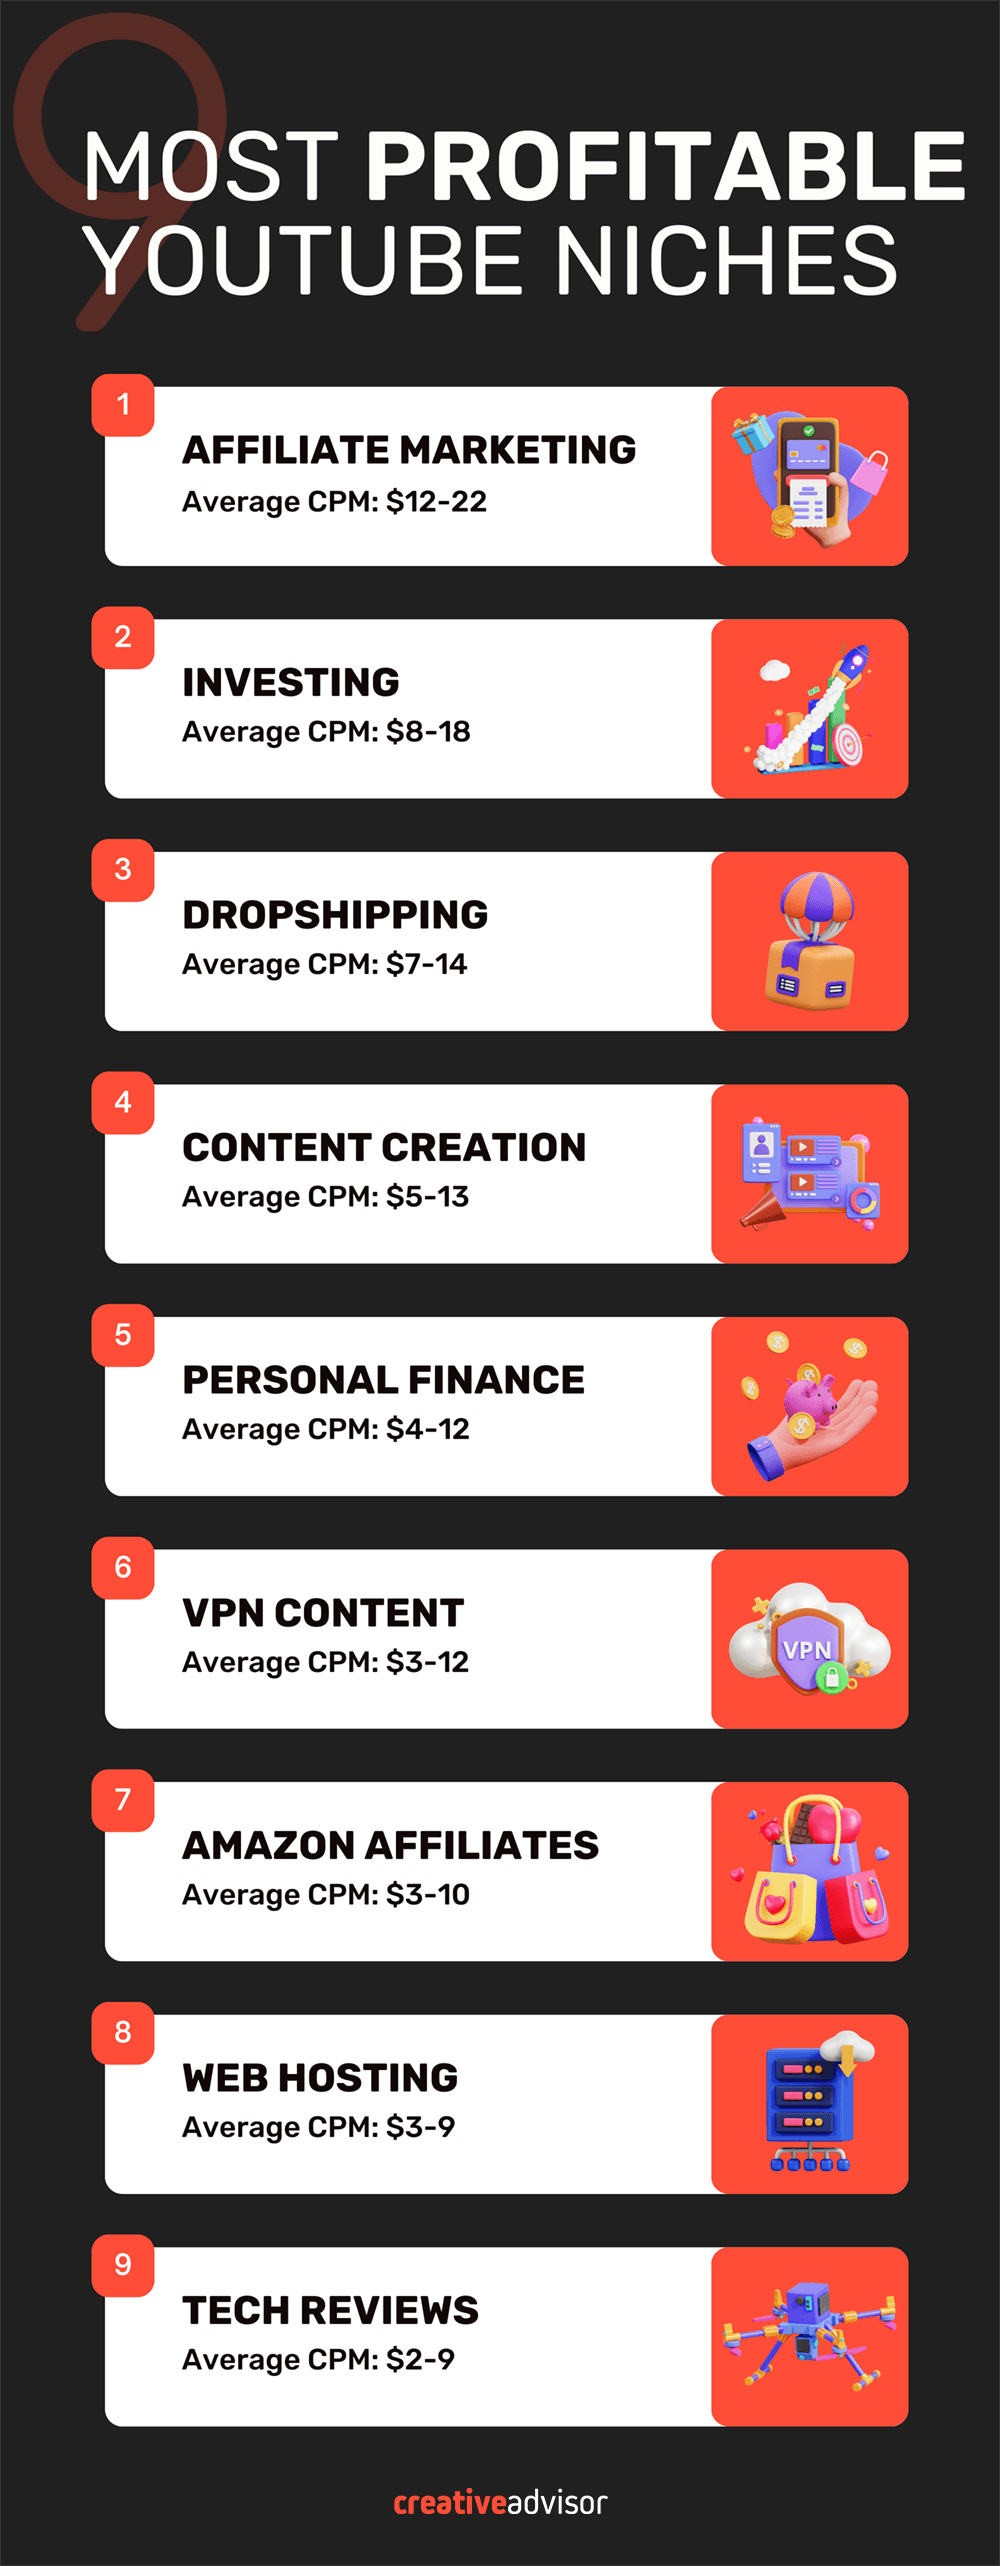 Infographic illustrating the top ten most profitable niches on YouTube for 2023, ranked by potential earnings